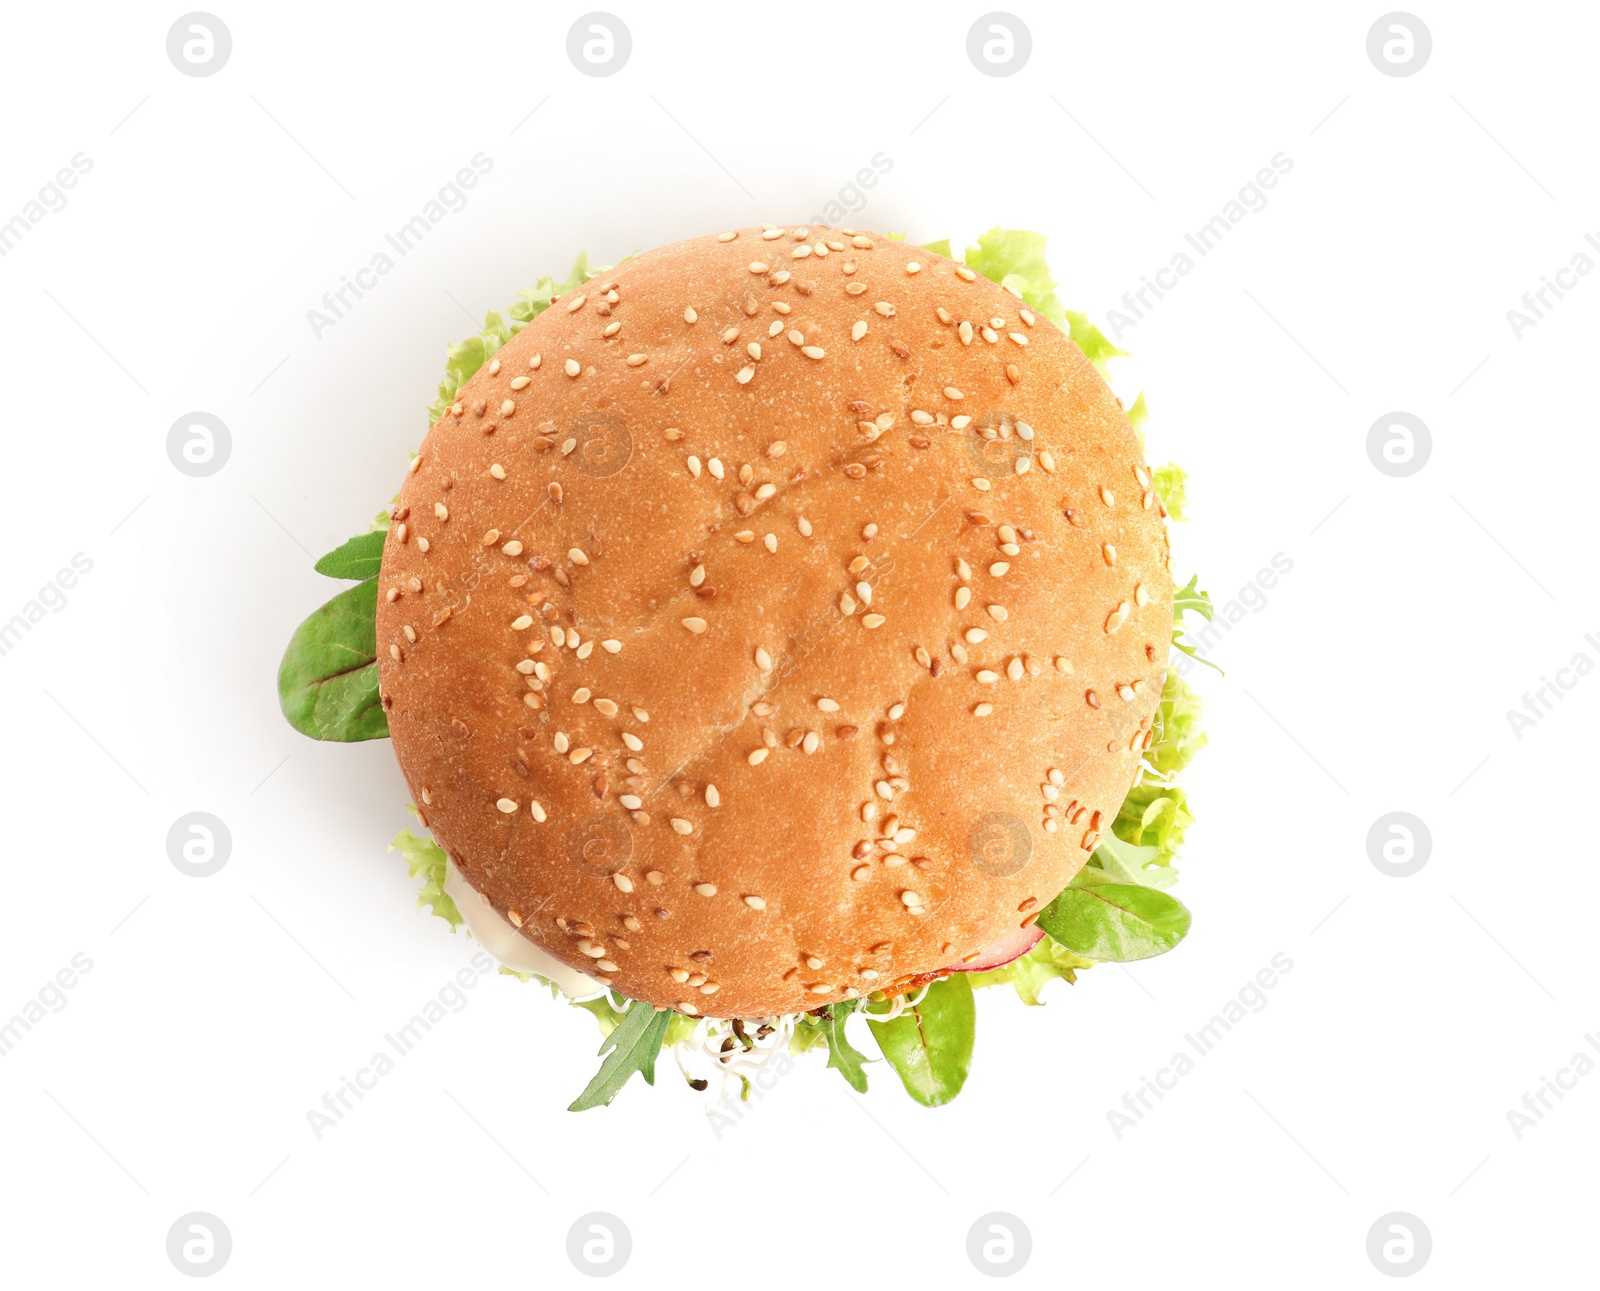 Photo of Tasty vegetarian burger on white background, top view